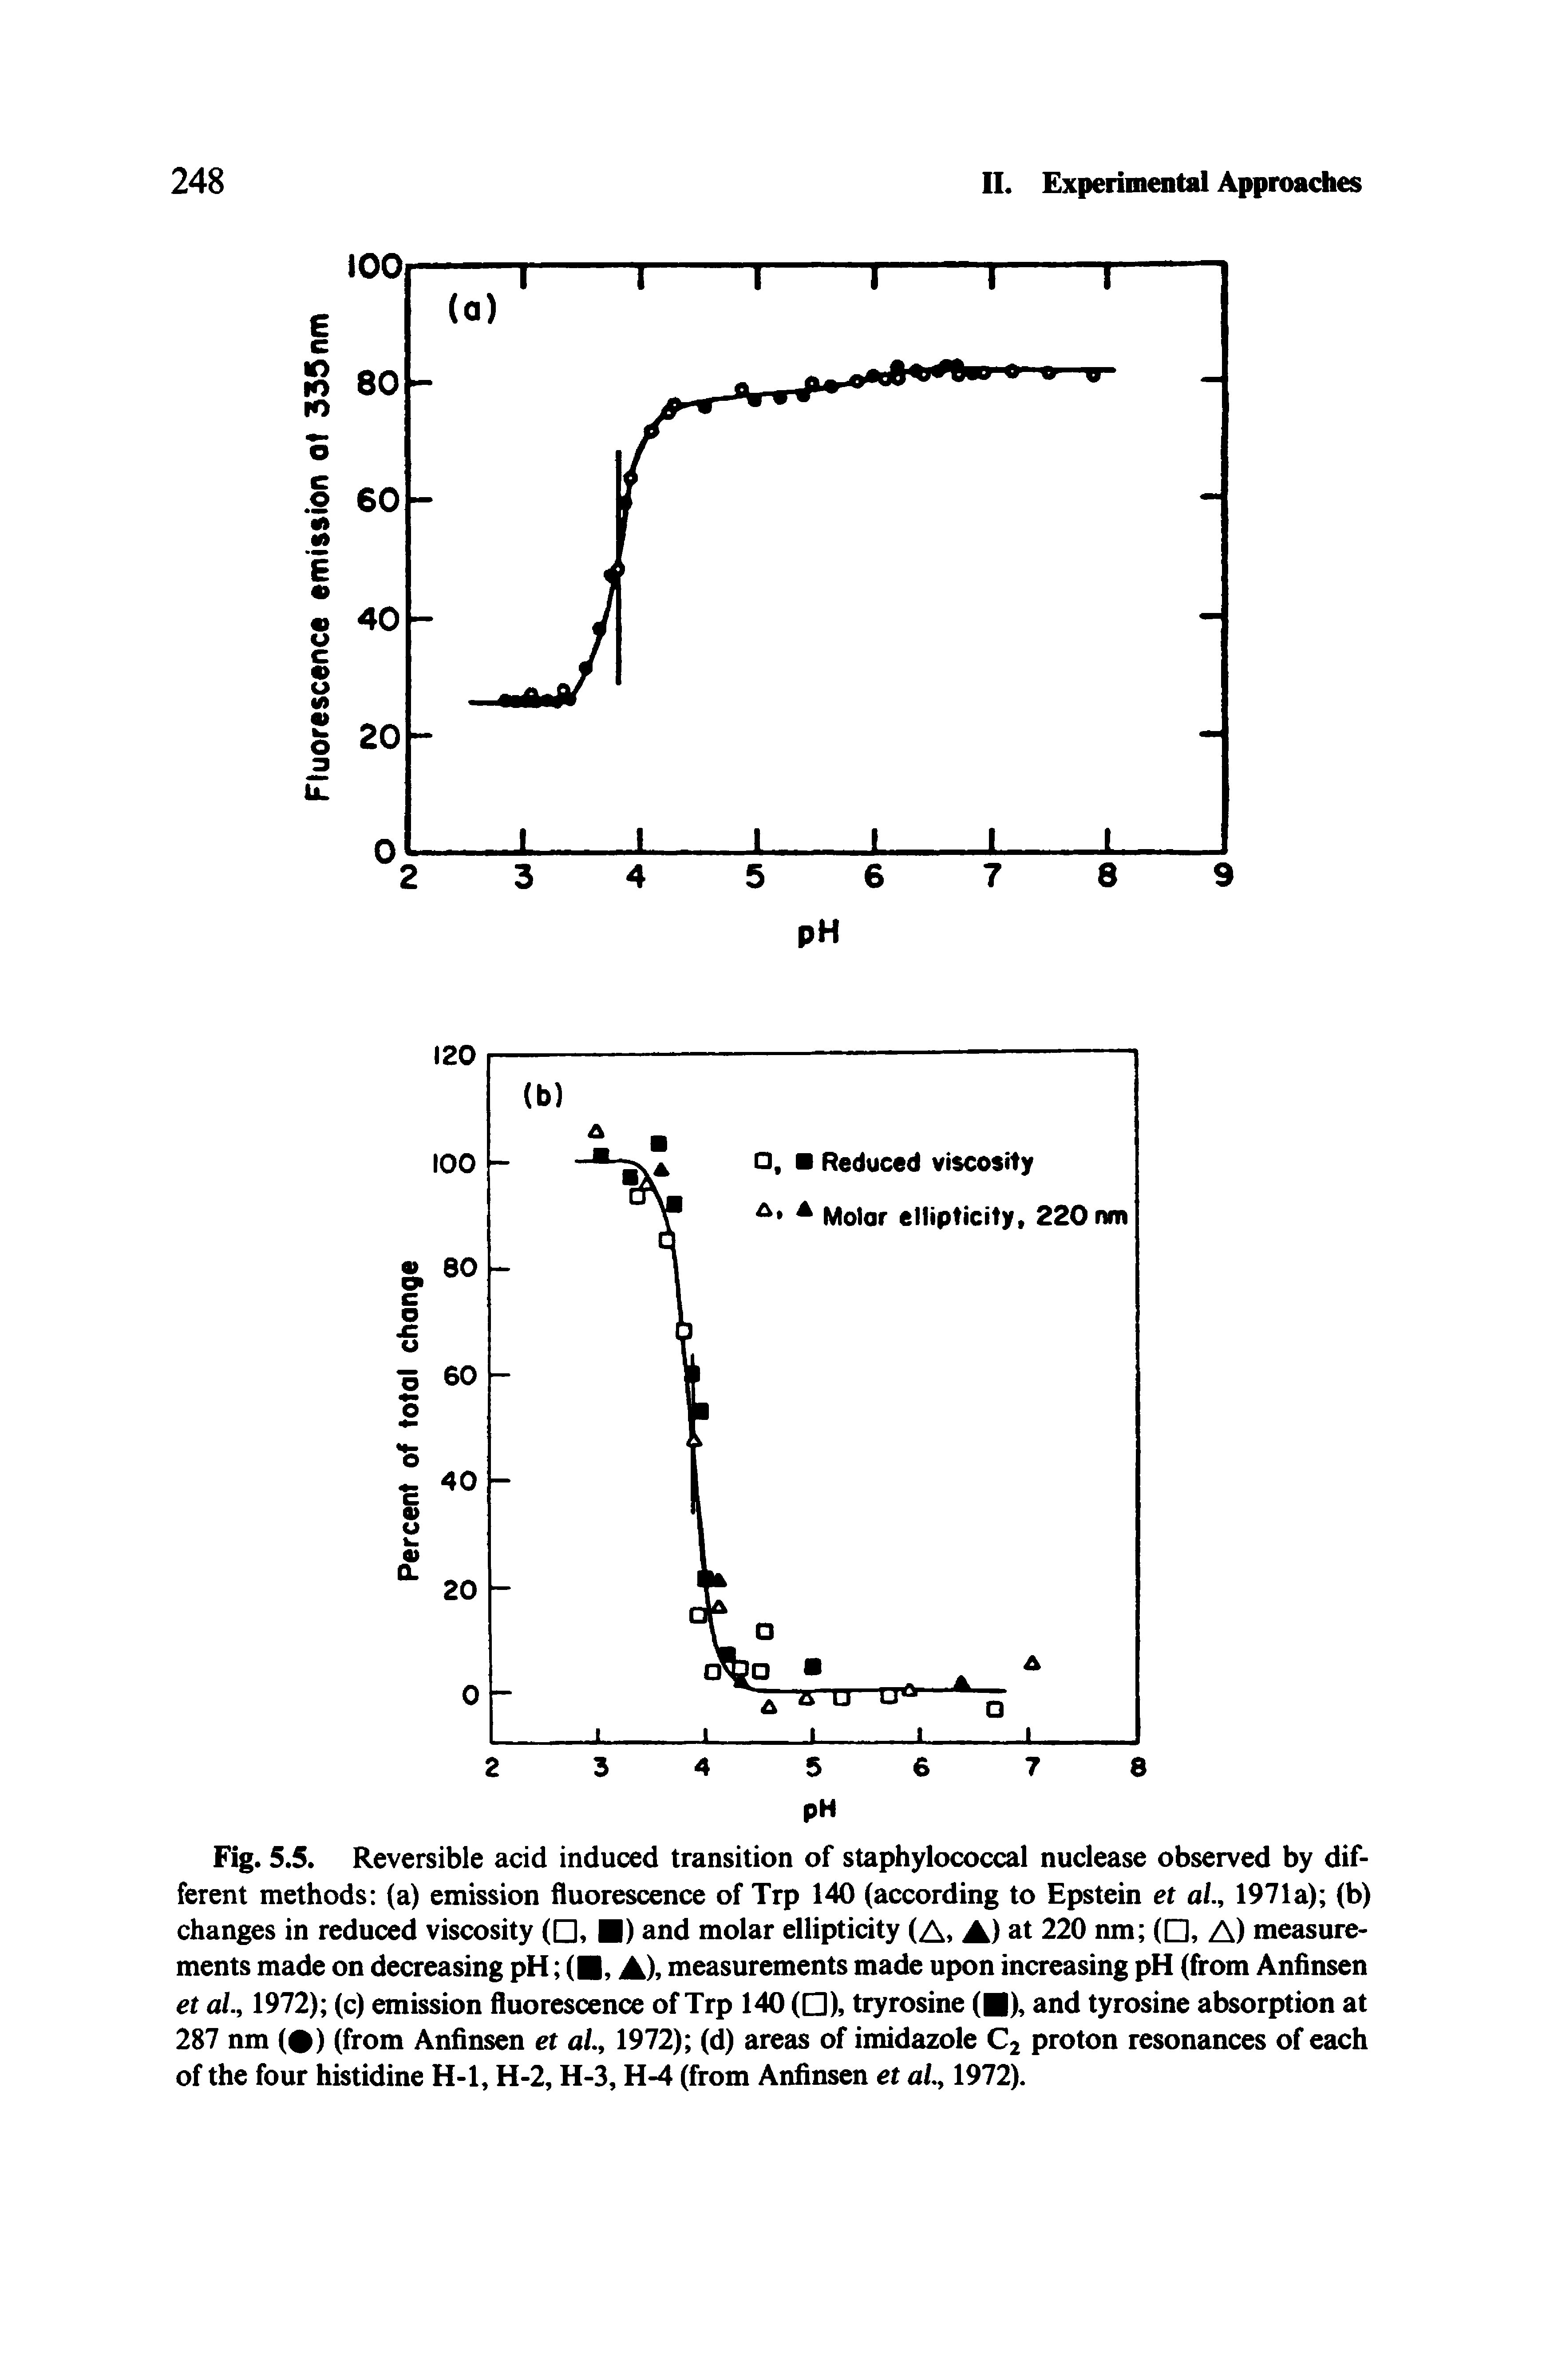 Fig. 5,5. Reversible acid induced transition of staphylococcal nuclease observed by different methods (a) emission fluorescence of Trp 140 (according to Epstein et aL, 1971a) (b) changes in reduced viscosity ( , ) and molar ellipticity (A A) at 220 nm ( , A) measurements made on decreasing pH ( , A), measurements made upon increasing pH (from Anfinsen et aL, 1972) (c) emission fluorescence of Trp 140 ( ), tryrosine ( ), and tyrosine absorption at 287 nm ( ) (from Anfinsen et aL, 1972) (d) areas of imidazole C2 proton resonances of each of the four histidine H-1, H-2, H-3, H-4 (from Anfinsen et aL, 1972).